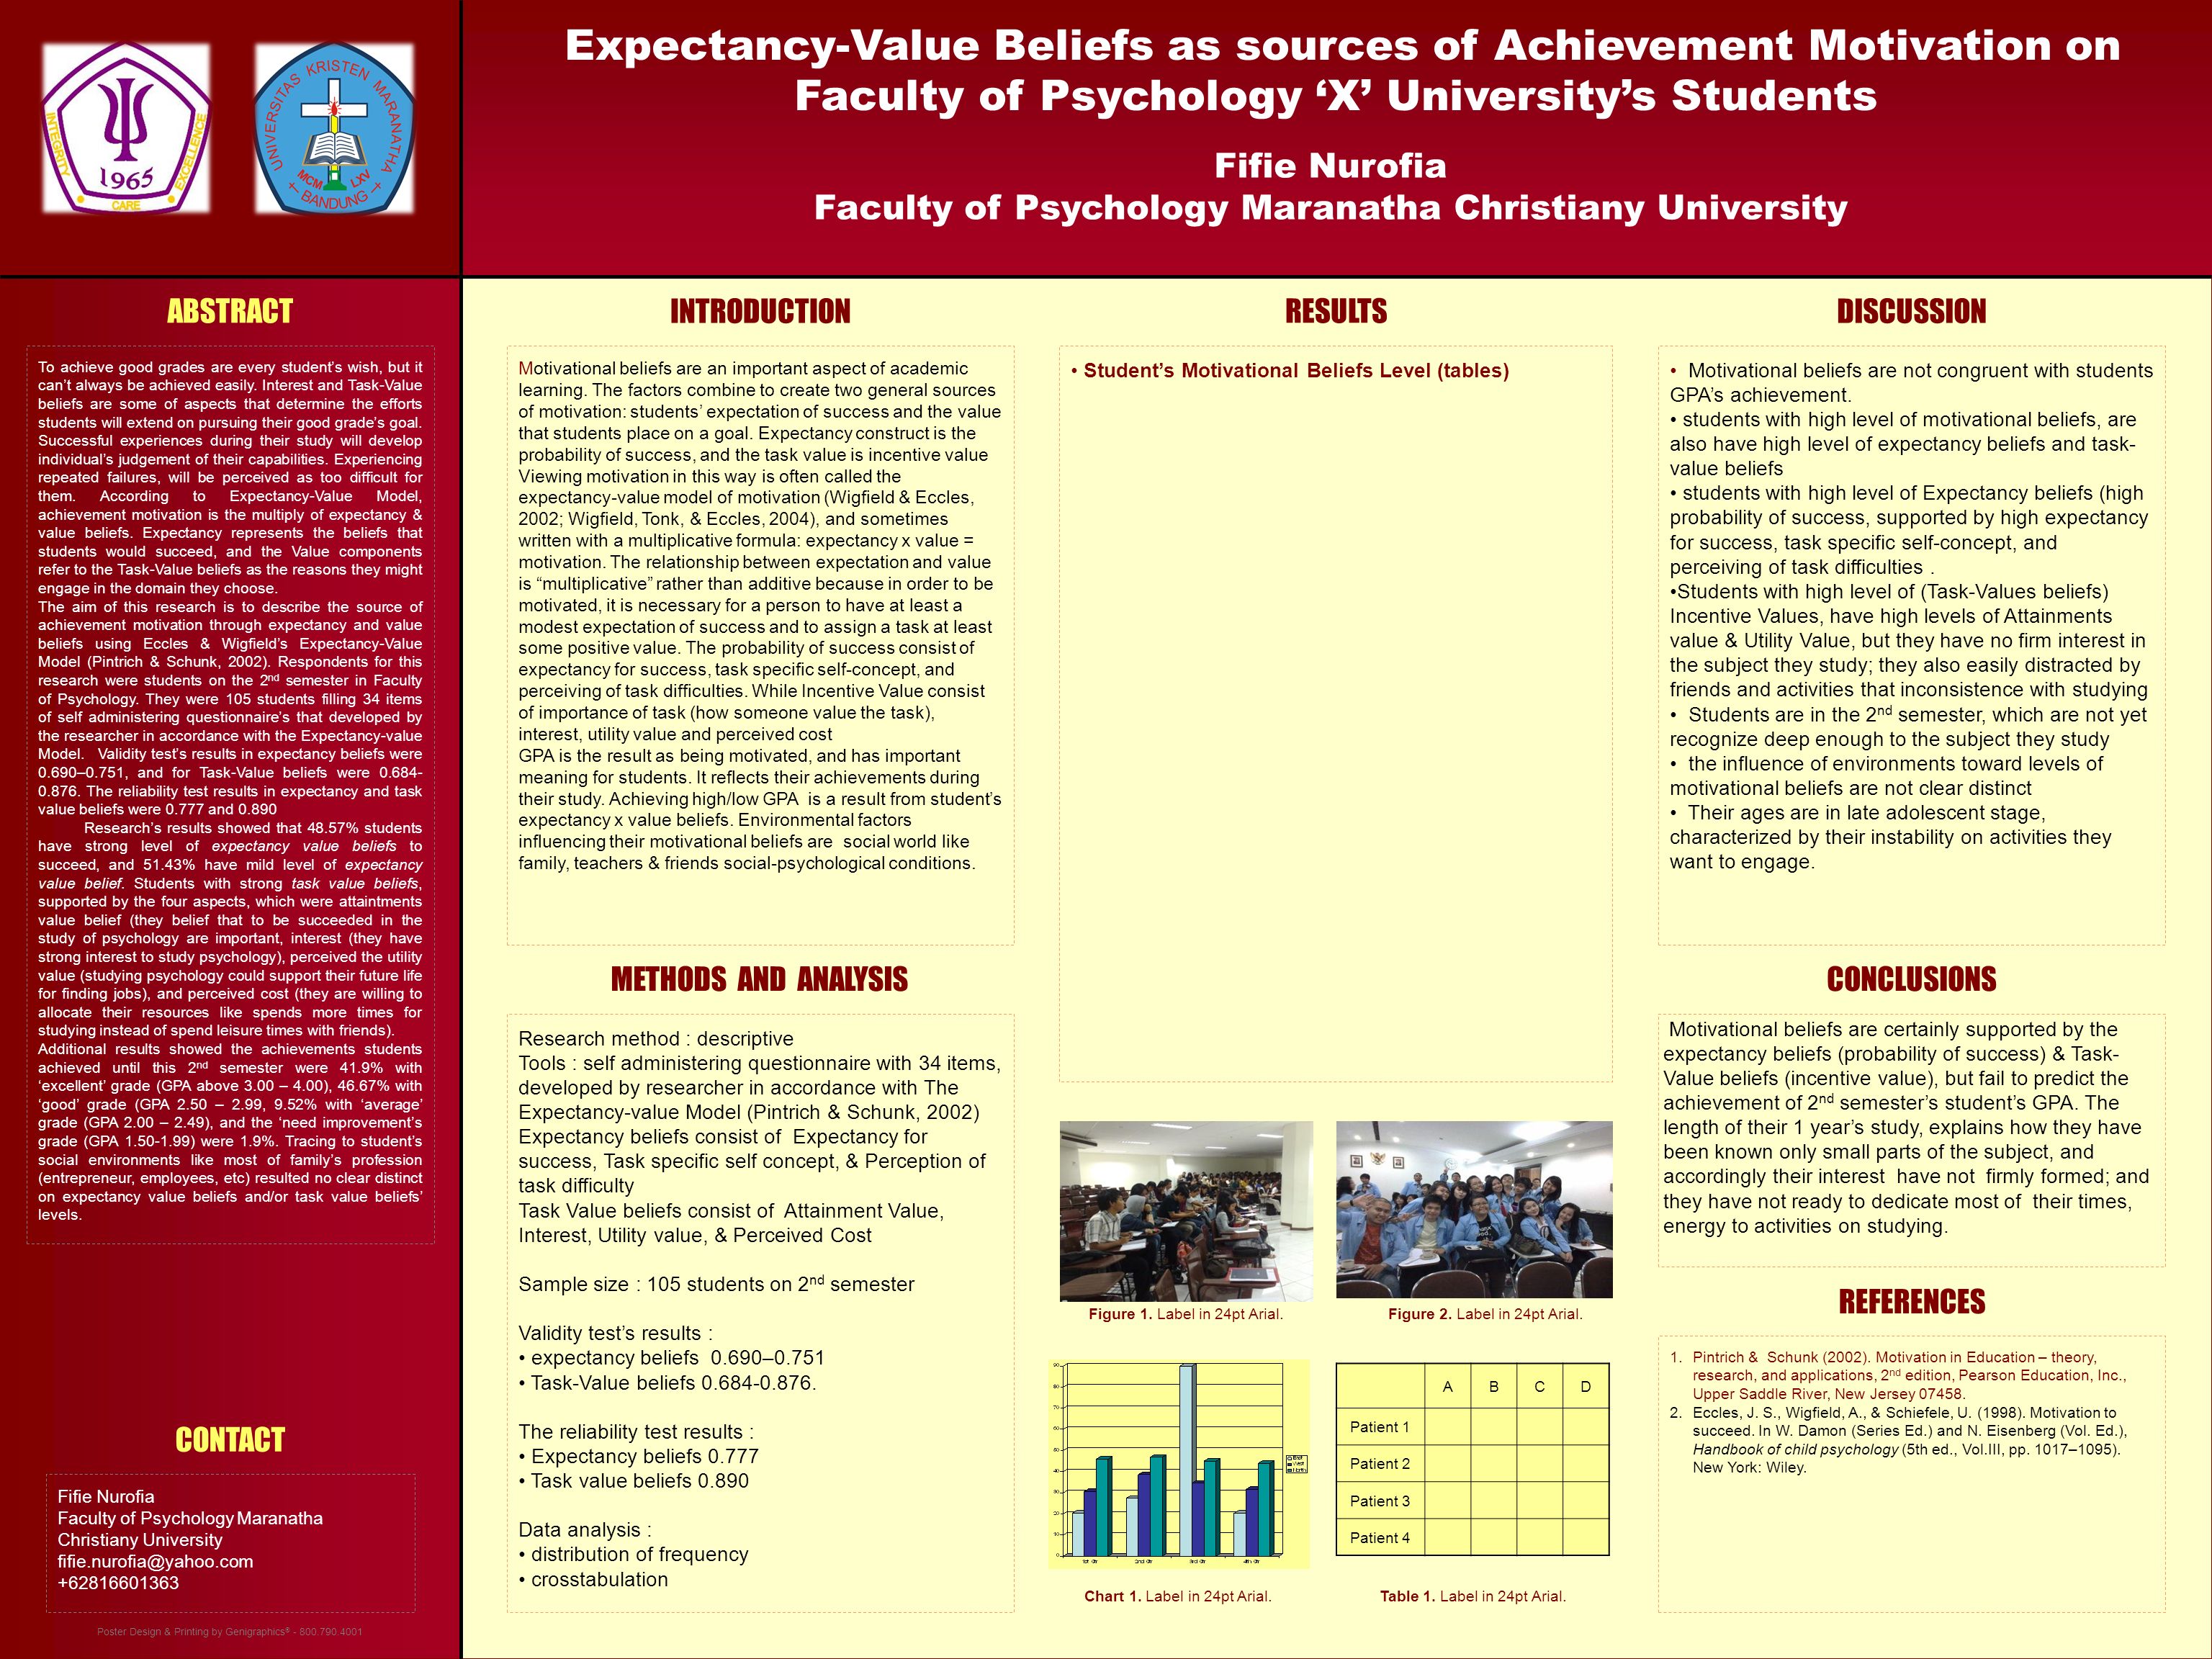 Poster Design & Printing by Genigraphics ® Expectancy-Value Beliefs as sources of Achievement Motivation on Faculty of Psychology ‘X’ University’s Students Fifie Nurofia Faculty of Psychology Maranatha Christiany University INTRODUCTION METHODS AND ANALYSISCONCLUSIONS DISCUSSION RESULTS REFERENCES ABCD Patient 1 Patient 2 Patient 3 Patient 4 Chart 1.